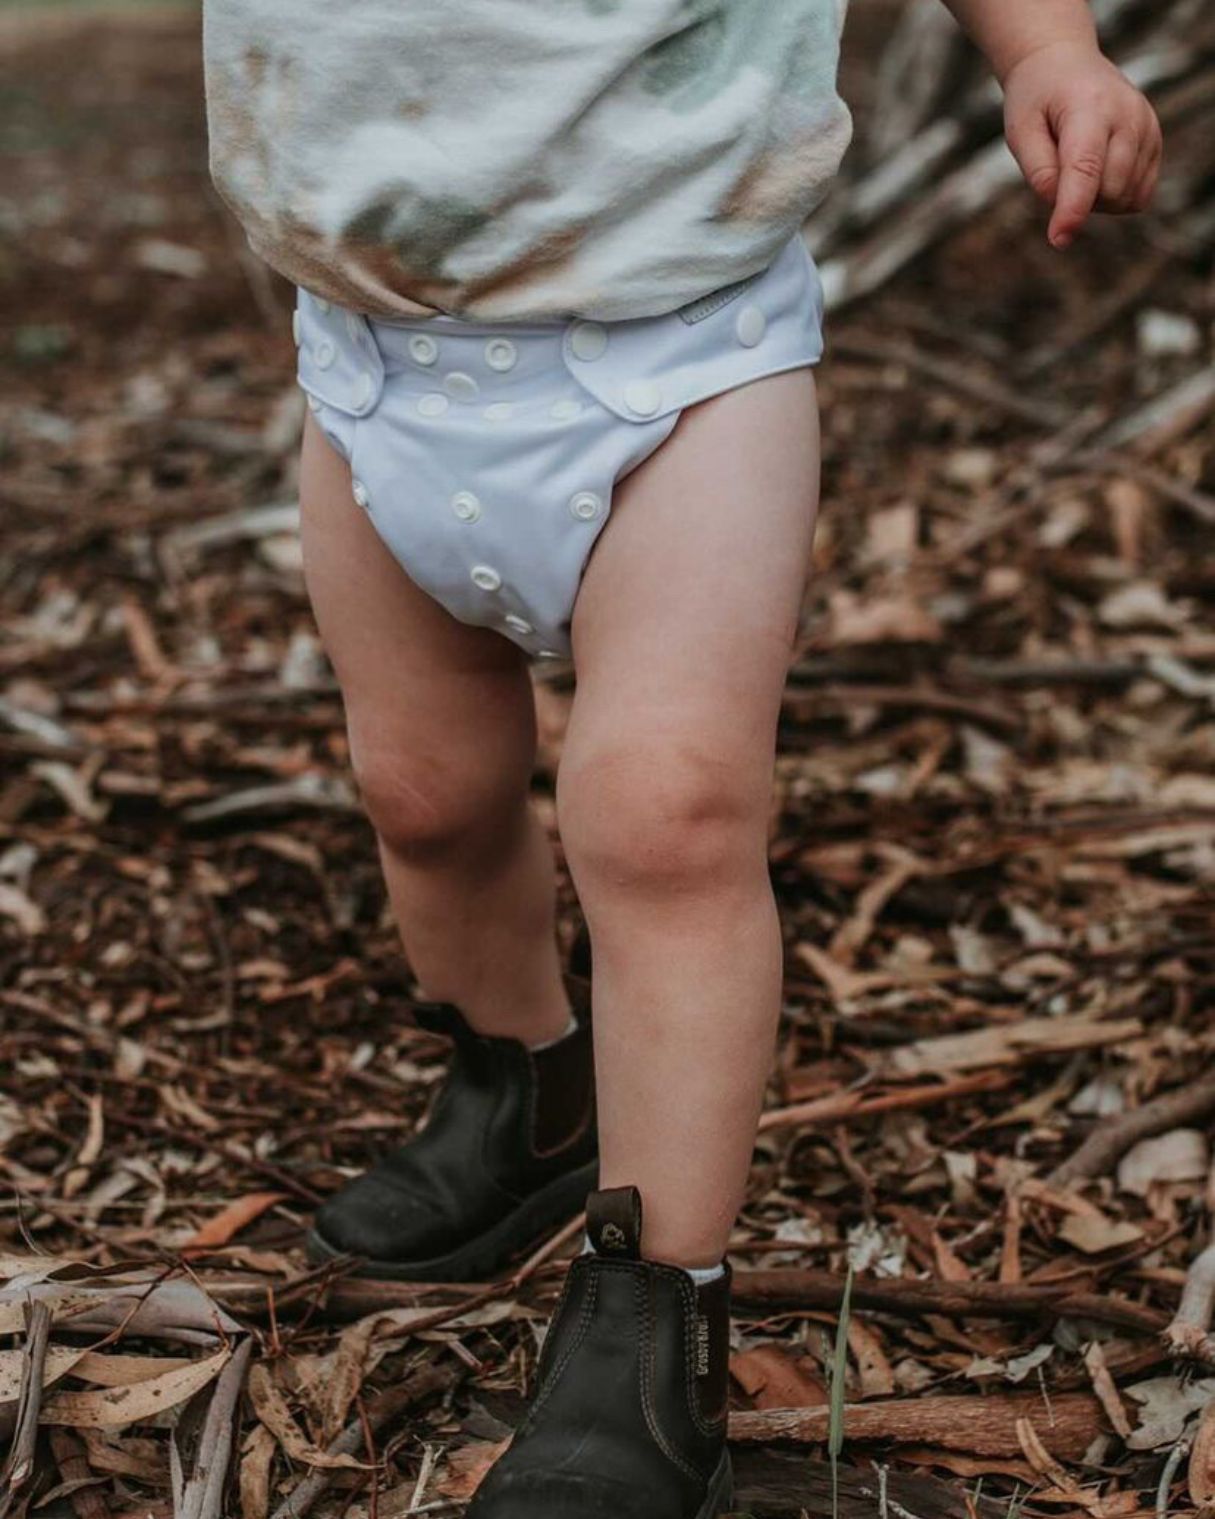 Toddler walks in his grey modern cloth nappy in some dead leaves and sticks.